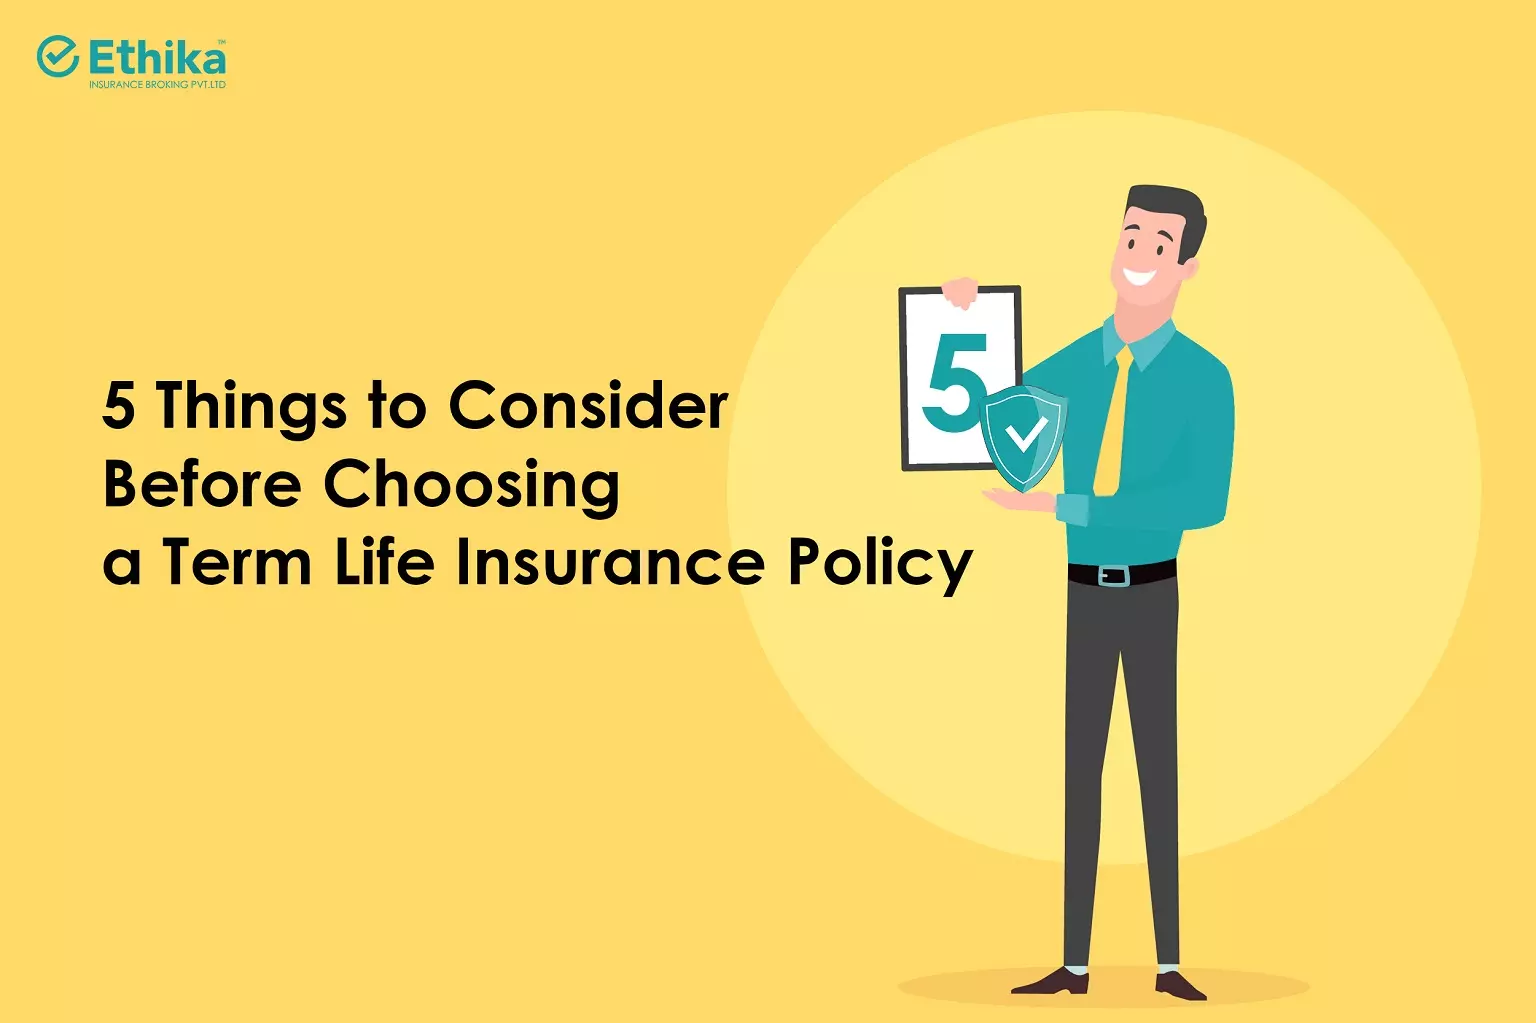 A checklist with text '5 Things to Consider Before Choosing a Term Life Insurance Policy' against a background of financial icons and a life insurance symbol